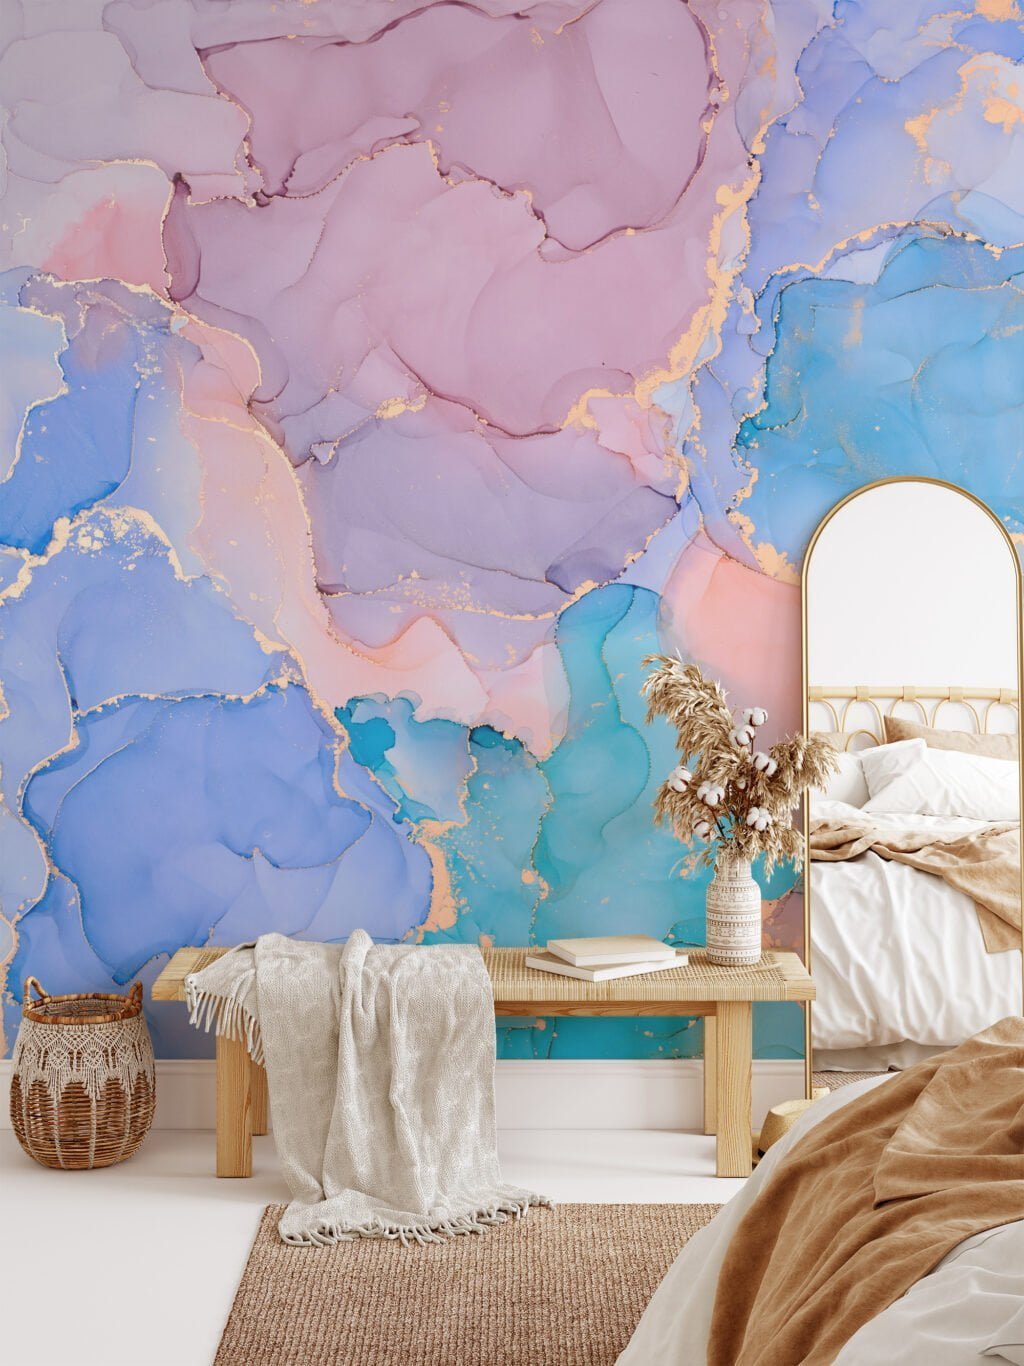 Captivating your walls with Dreamy Colorful Ink Art Wallpaper